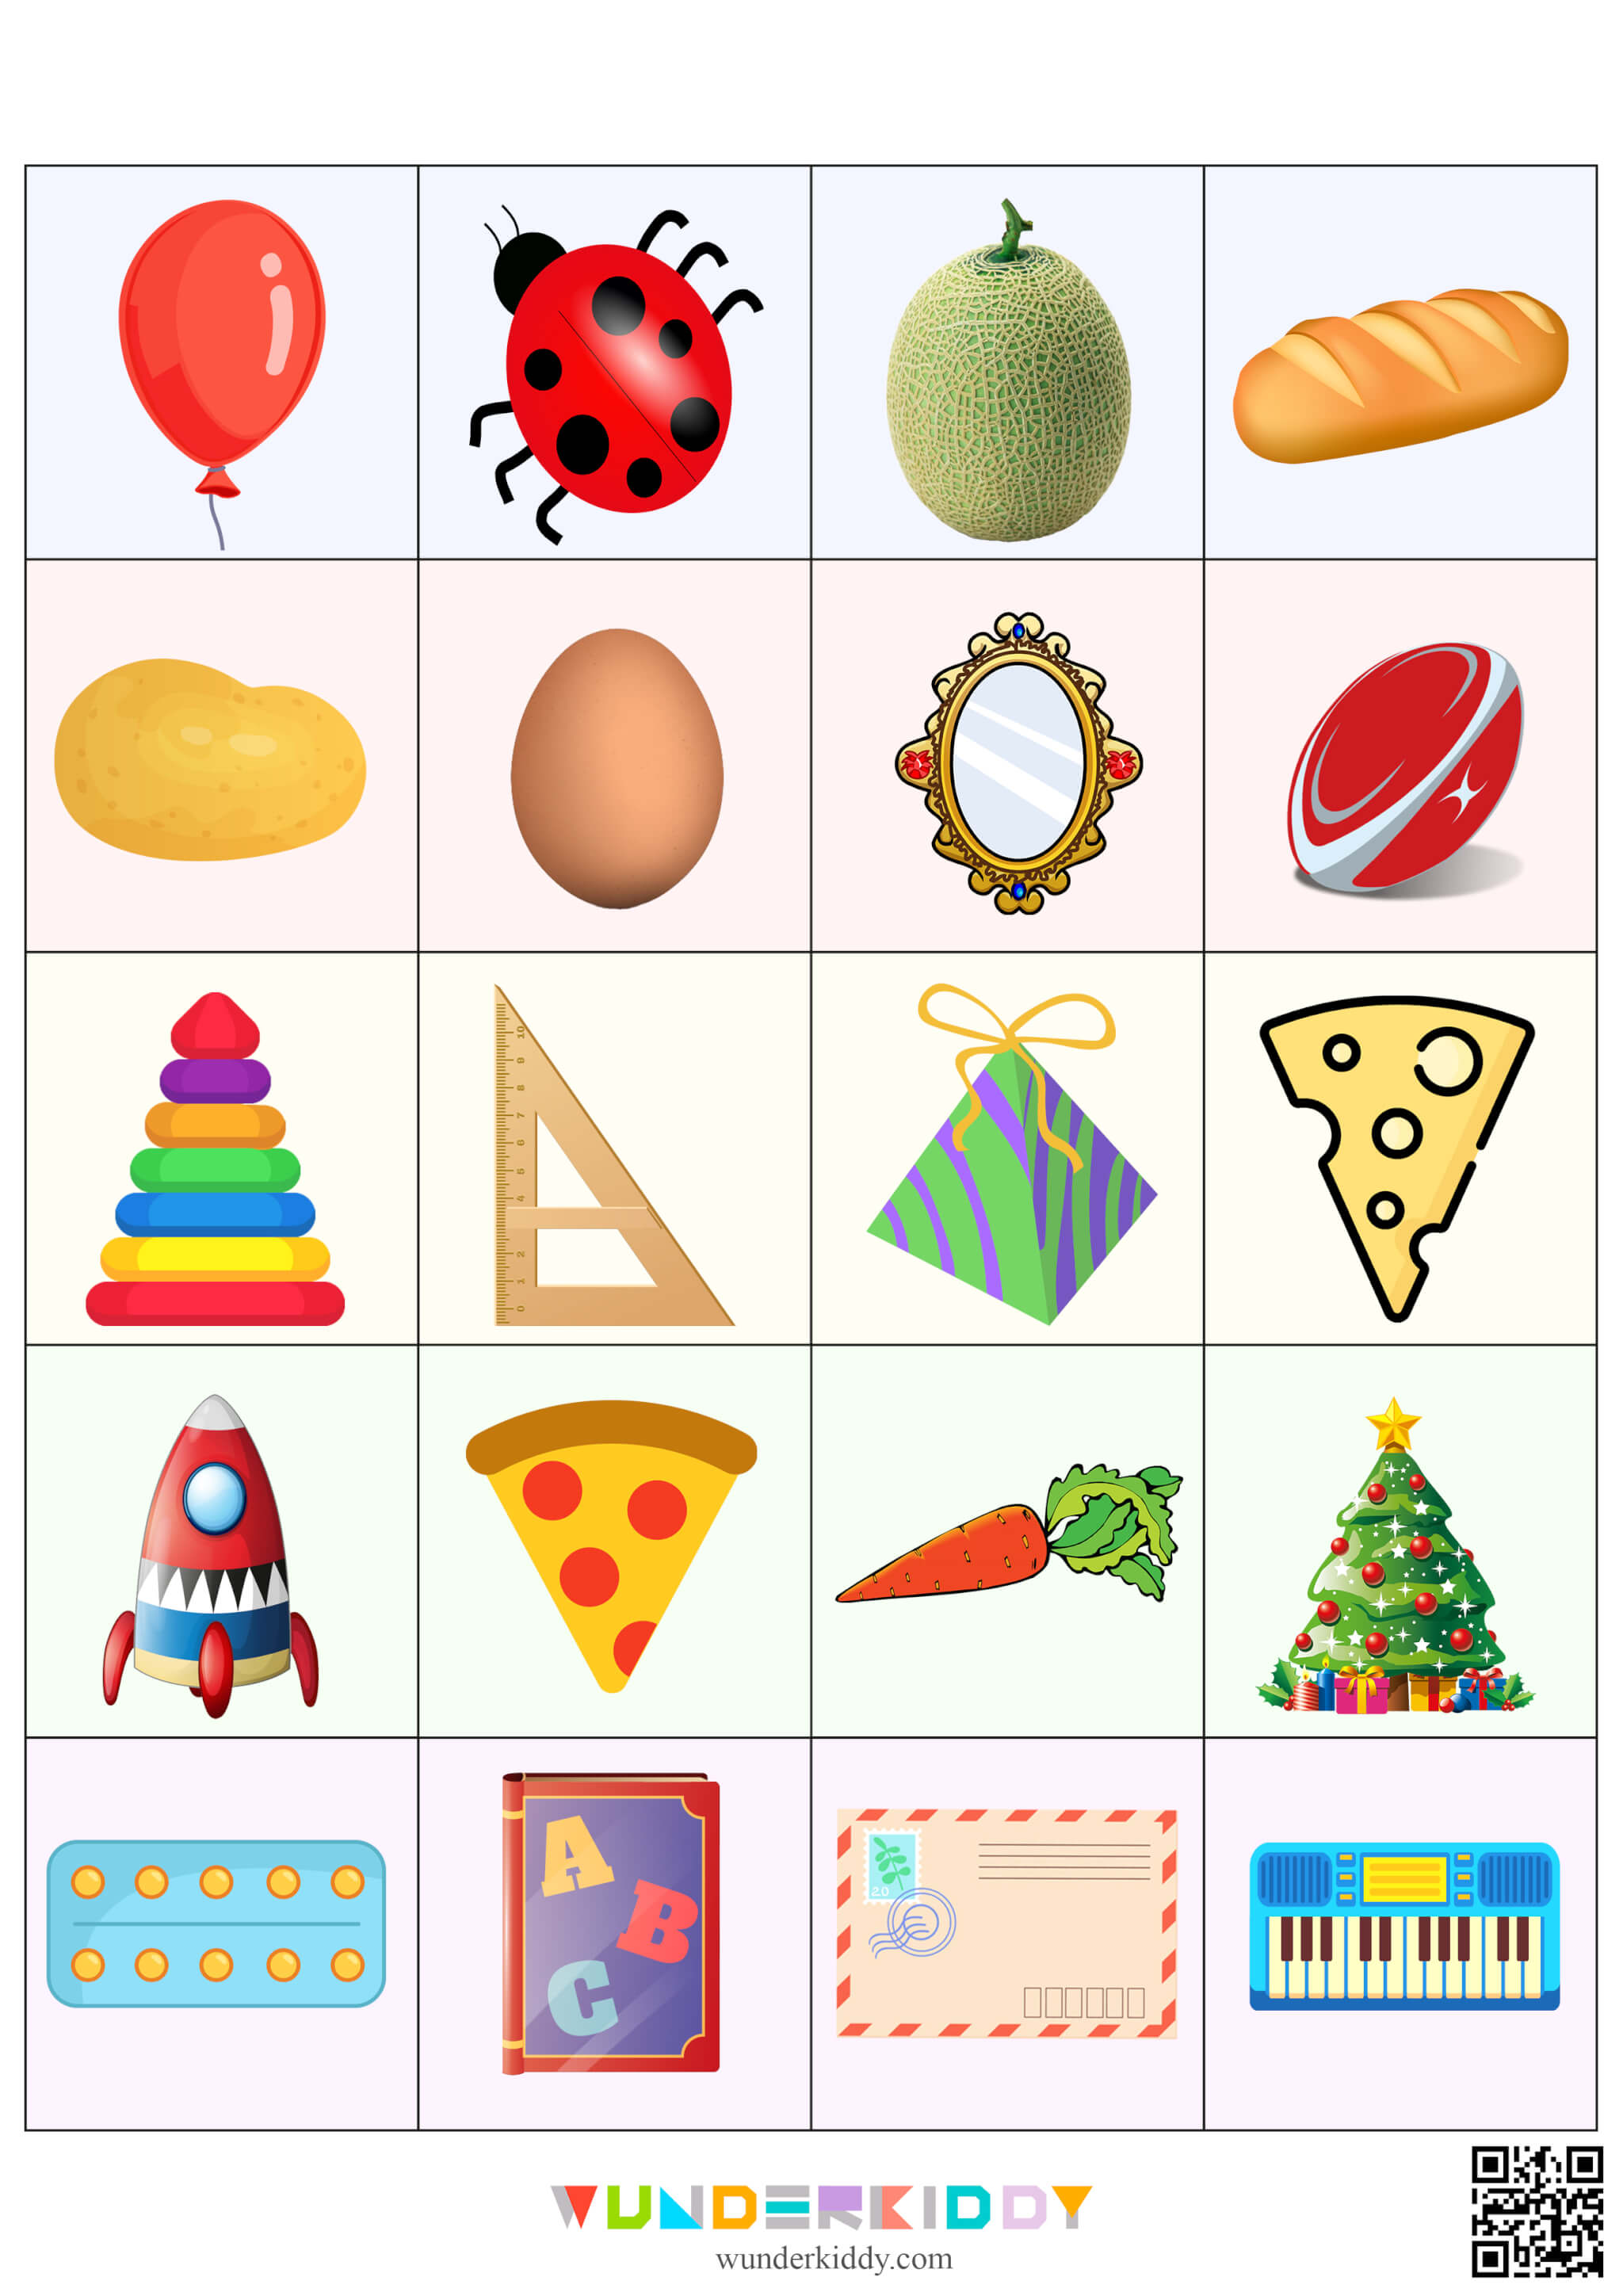 Sorting Game Shapes and Objects - Image 2